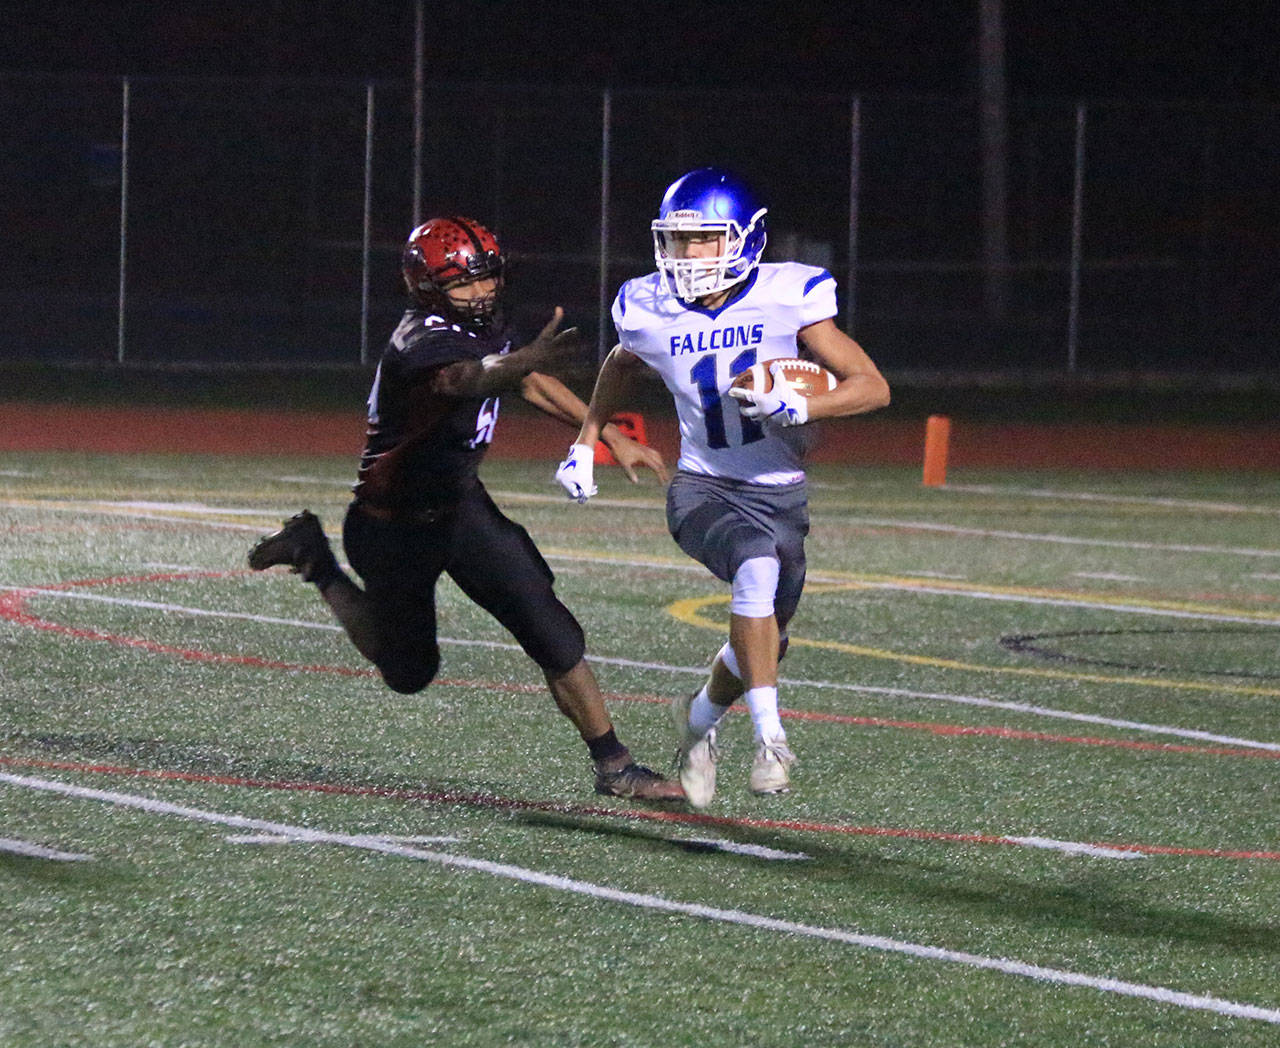 Alex Black returns a kickoff for South Whidbey. (Photo by Jim Waller/South Whidbey Record)